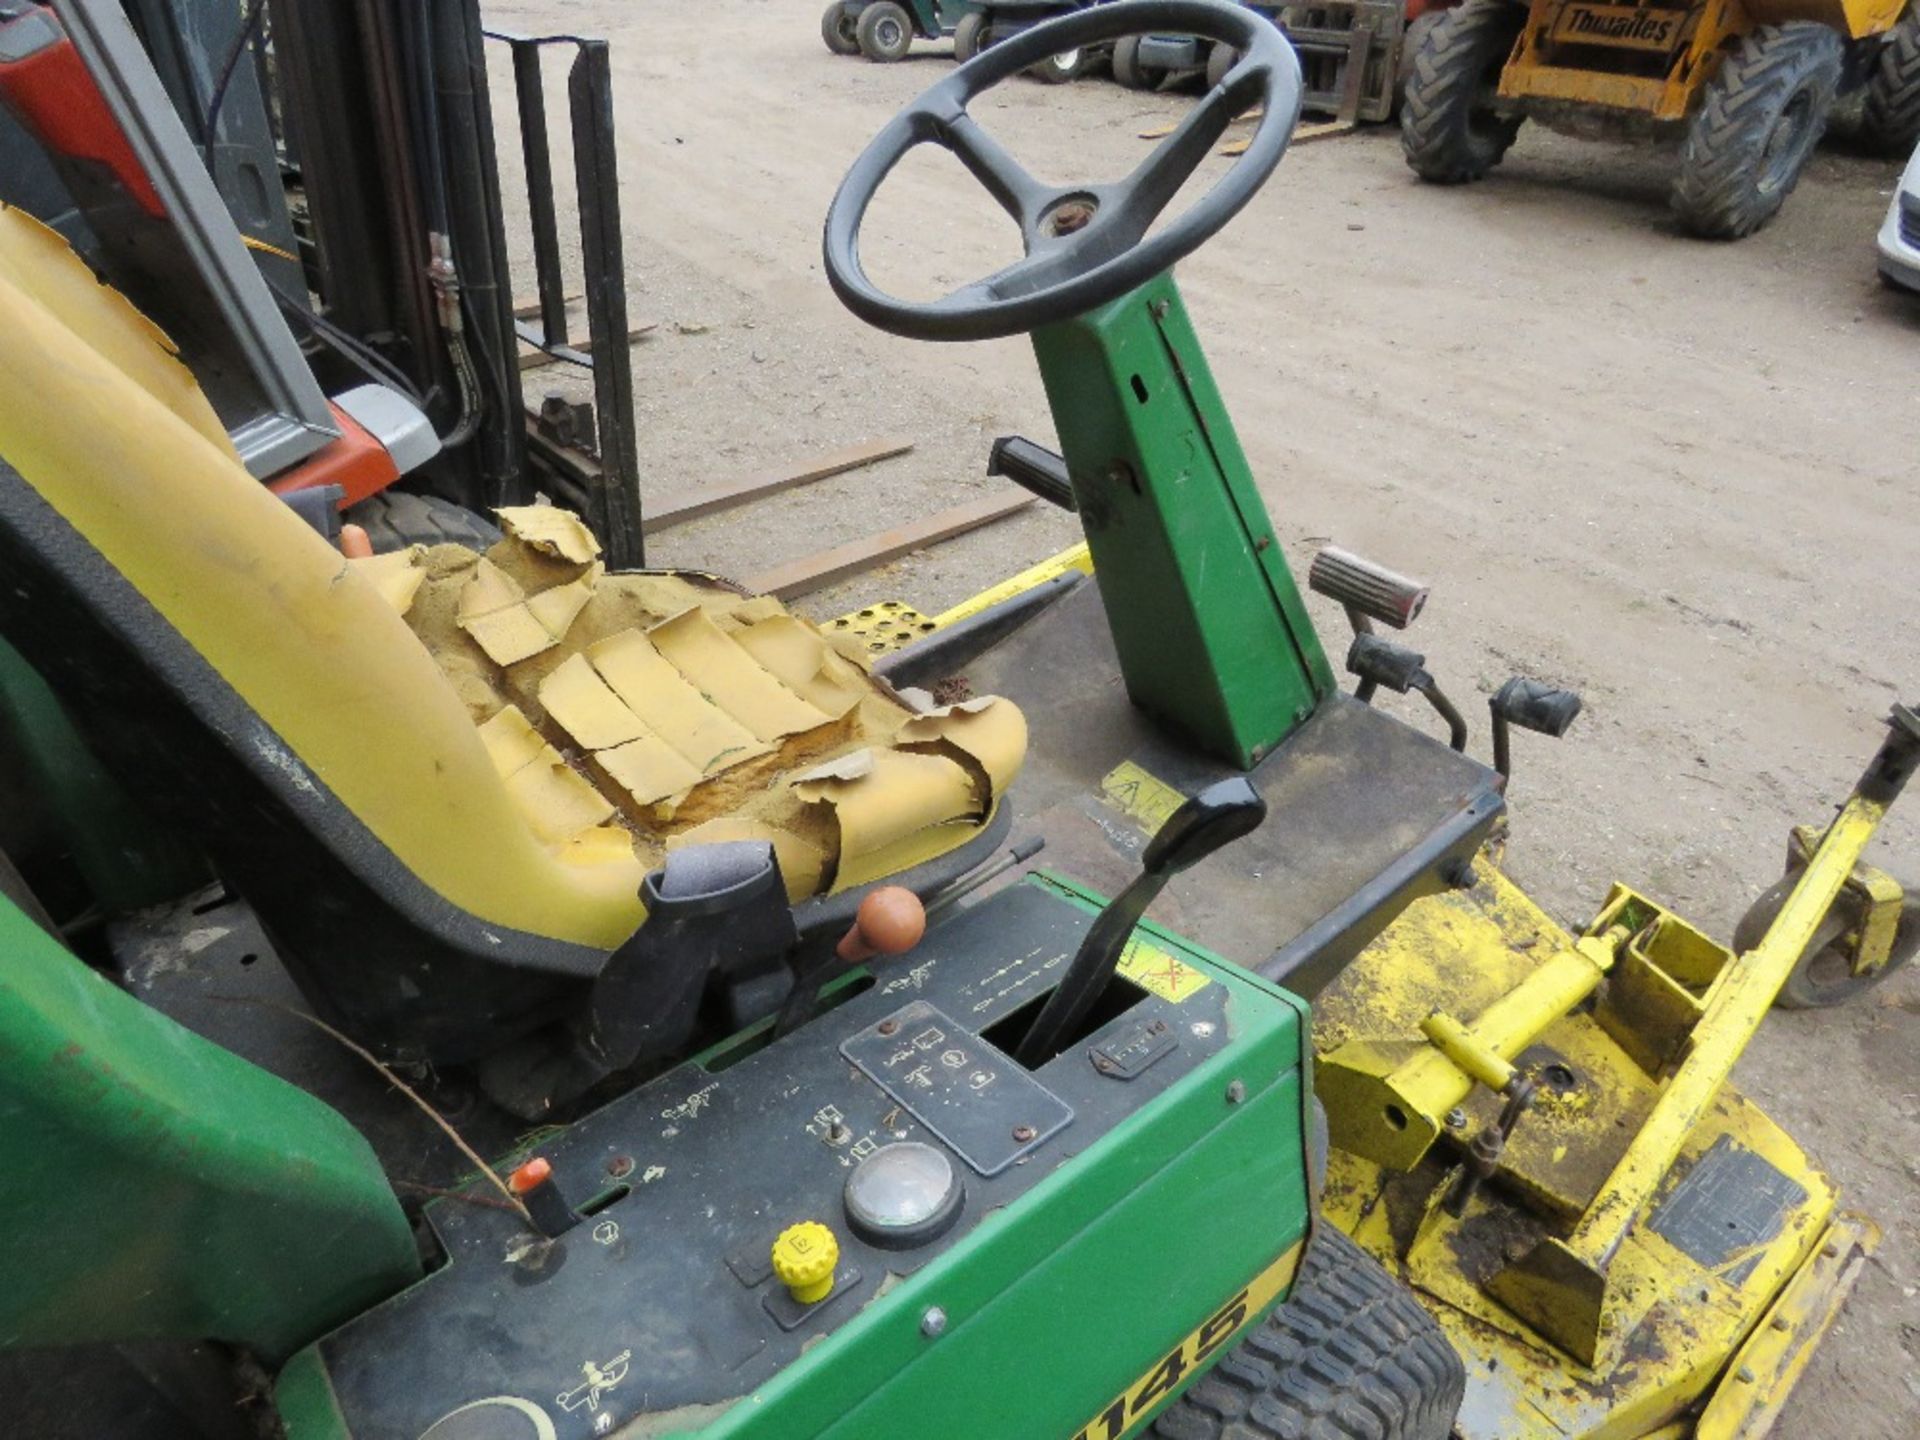 JOHN DEERE 1145 4WD OUT FRONT ROTARY MOWER. WHEN TESTED WAS SEEN TO START, RUN, DRIVE AND MOWER ENGA - Image 7 of 11